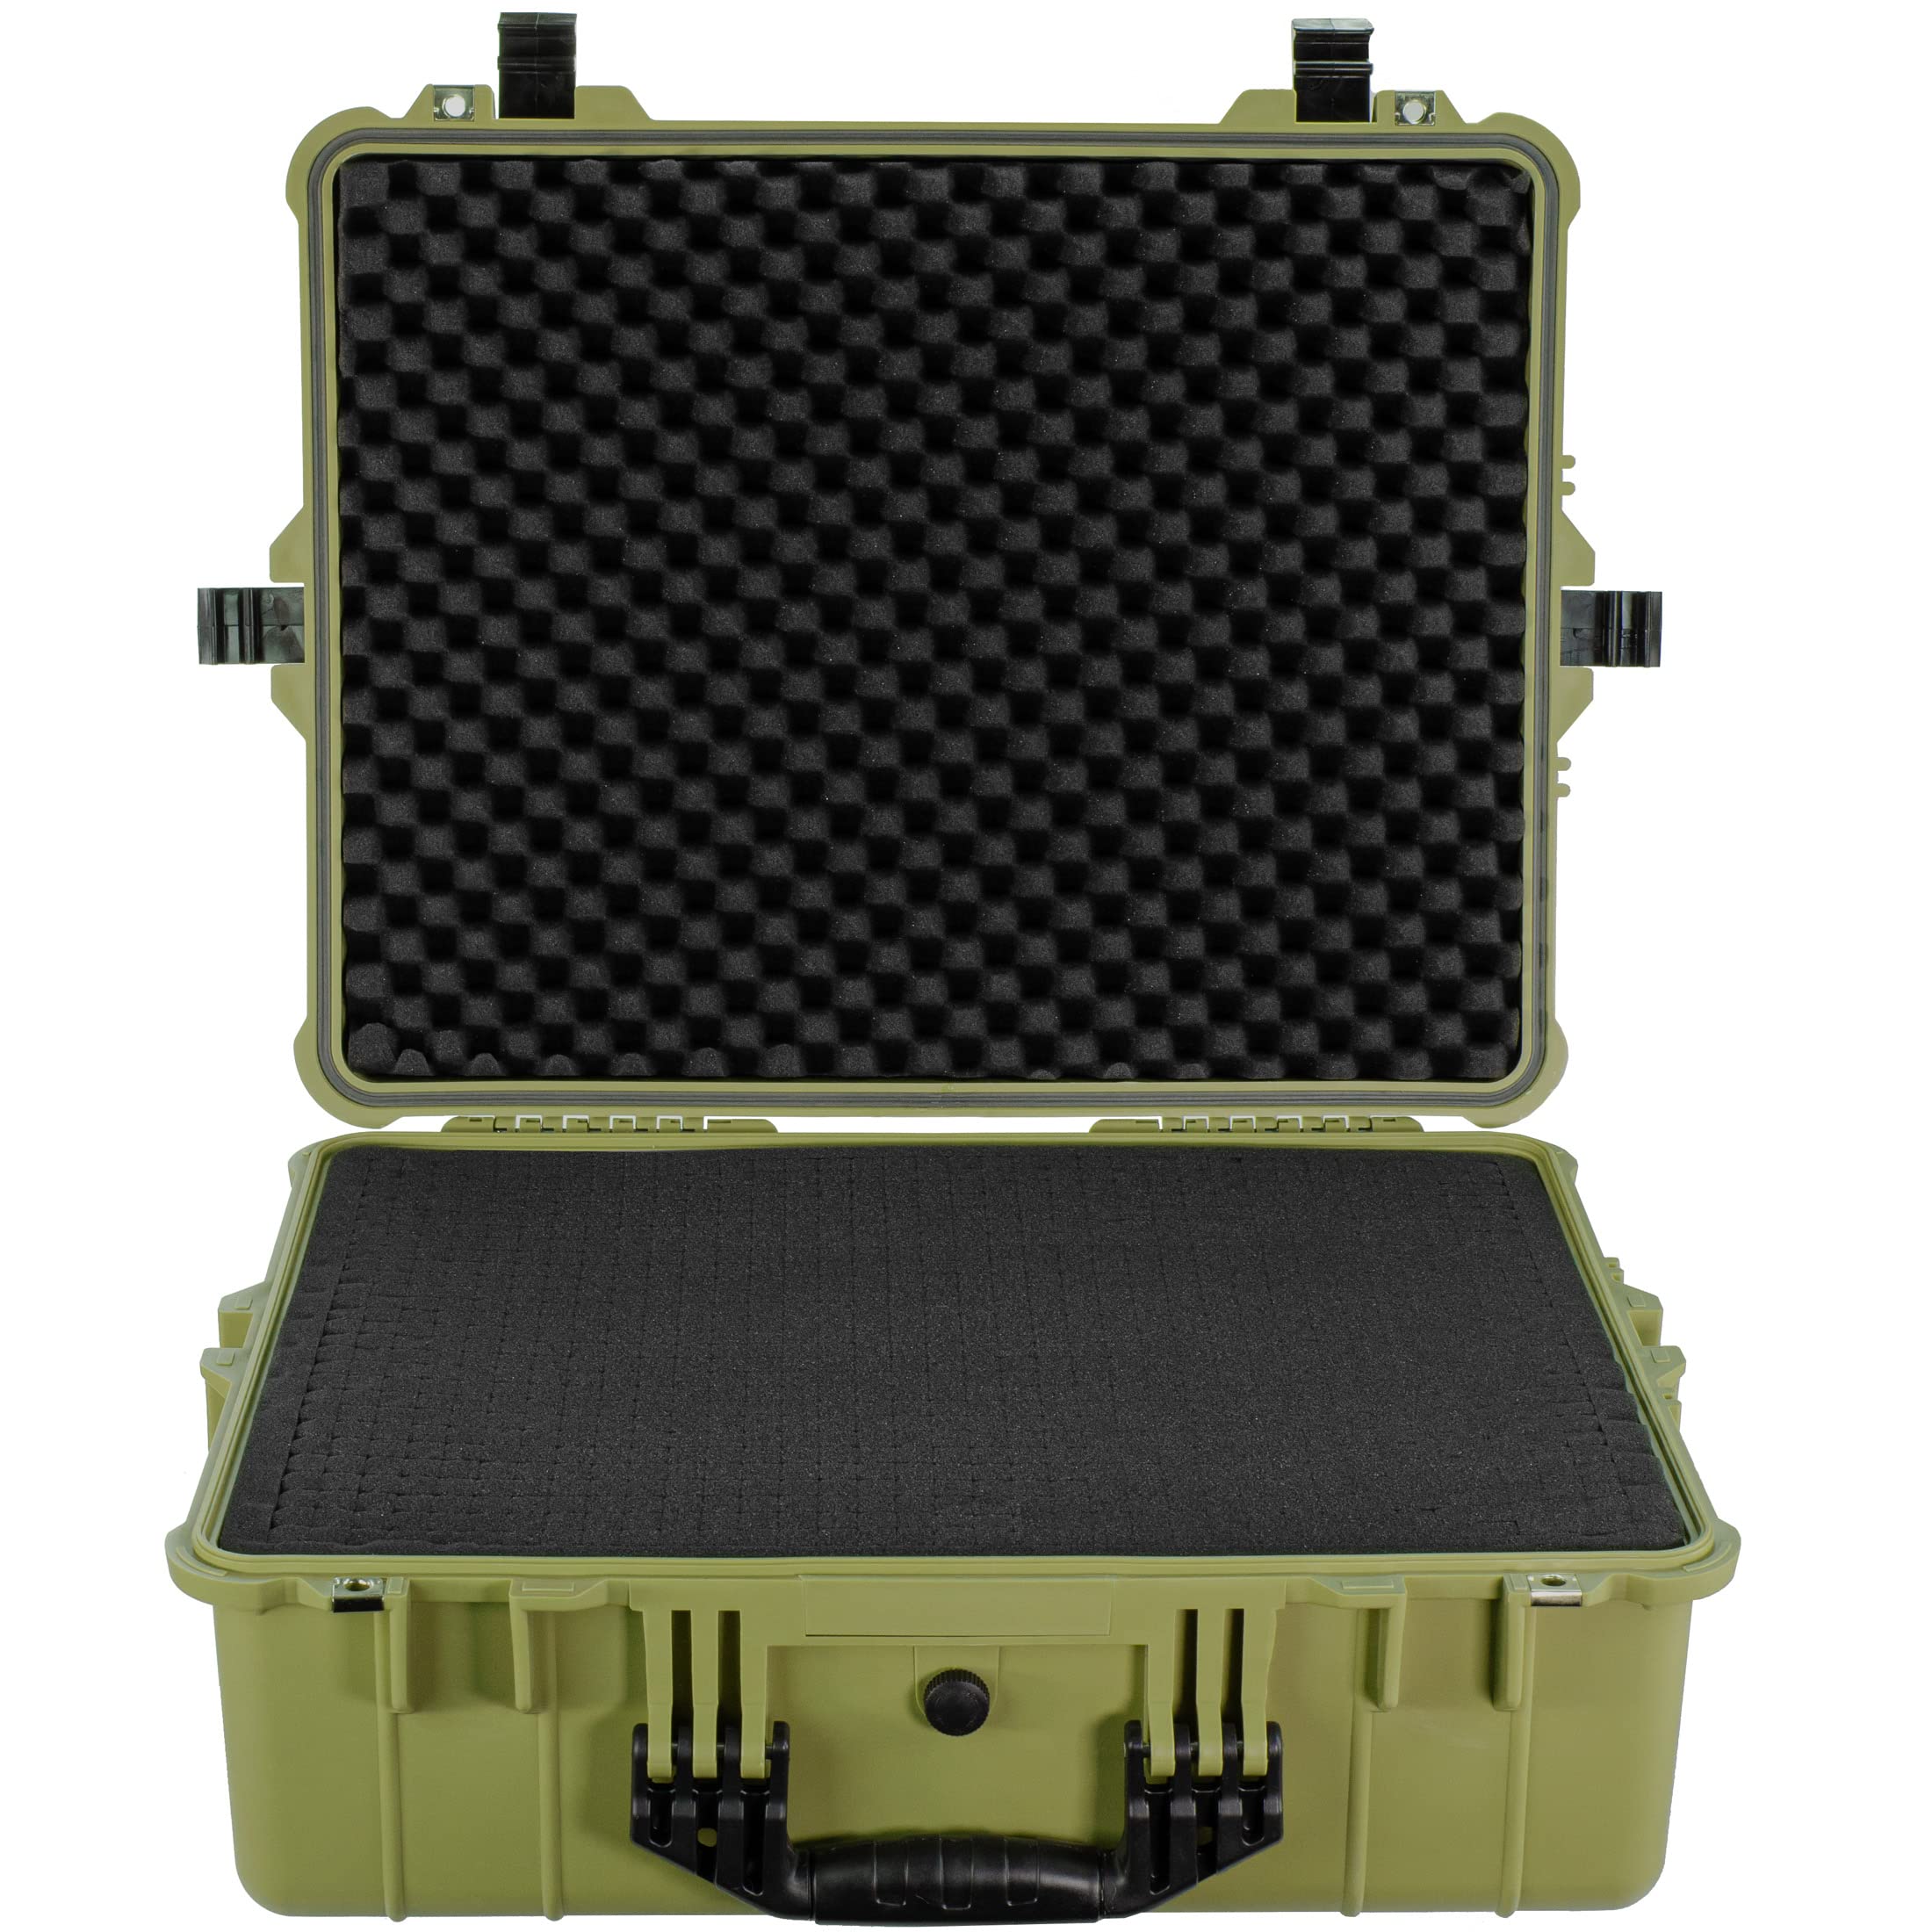 Eylar Extra Large 24 Inch Protective Hard Camera Case, Gear, Equipment, Devices, Monitor Case Waterproof with Foam TSA Standards OD Green